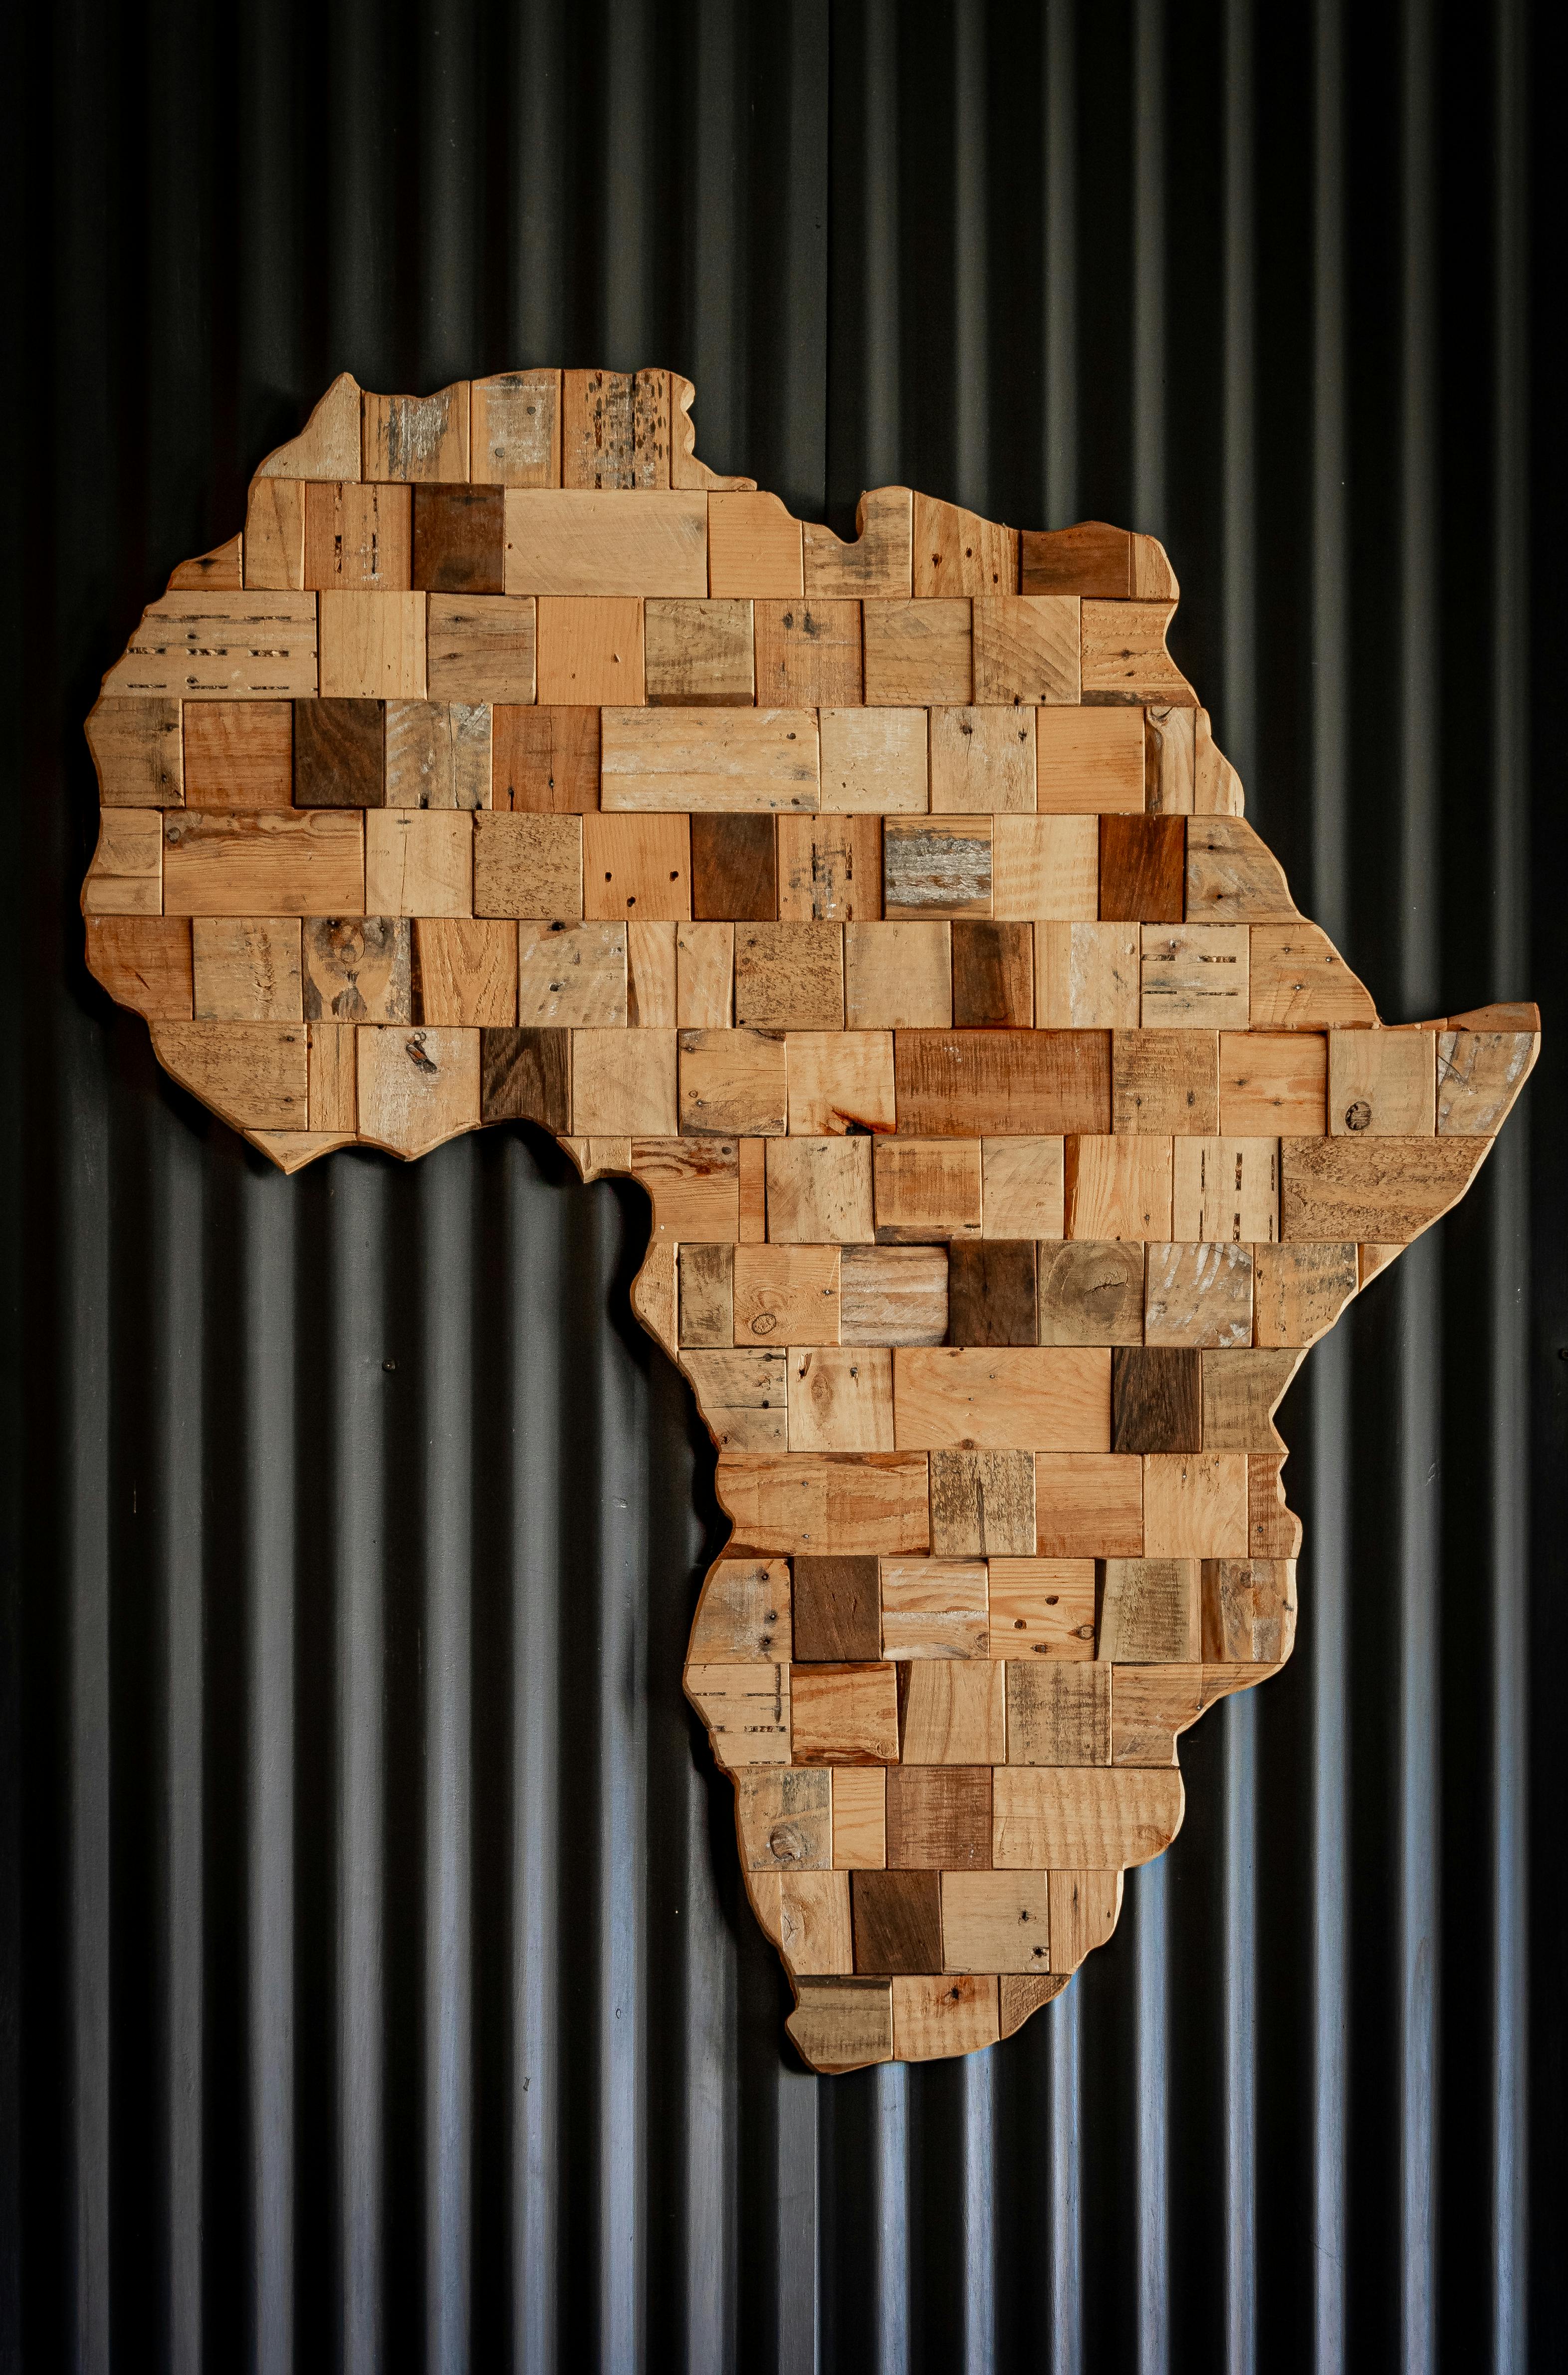 Top 7 countries to do business in Africa 